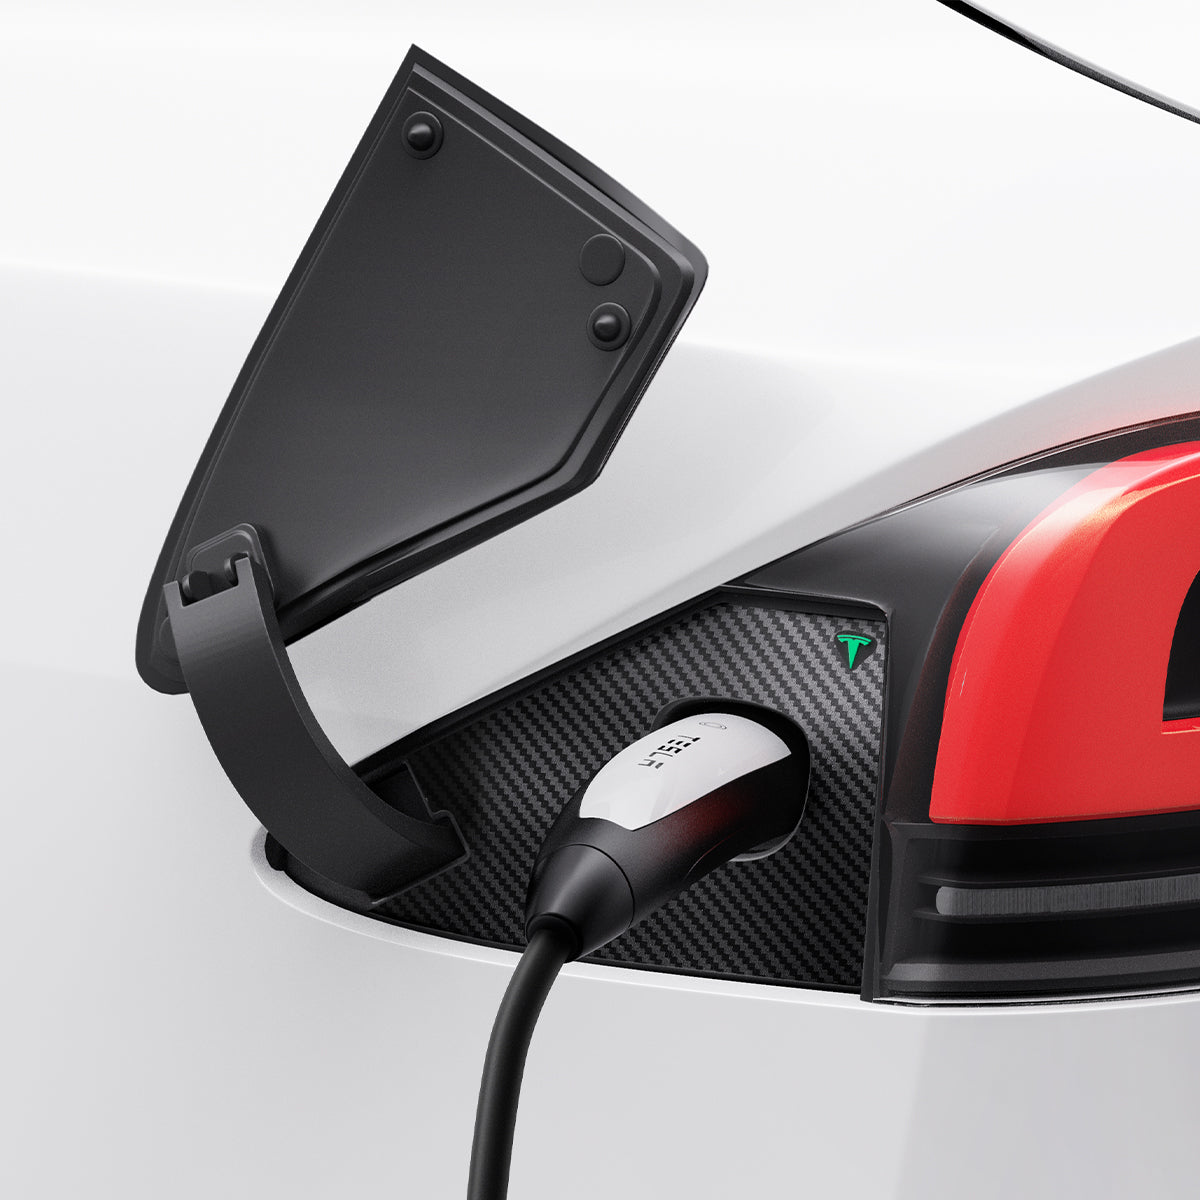 AFL07573 - Tesla Model X Charging Port Protective Film TO422 in Transparency showing the fully installed protective cover